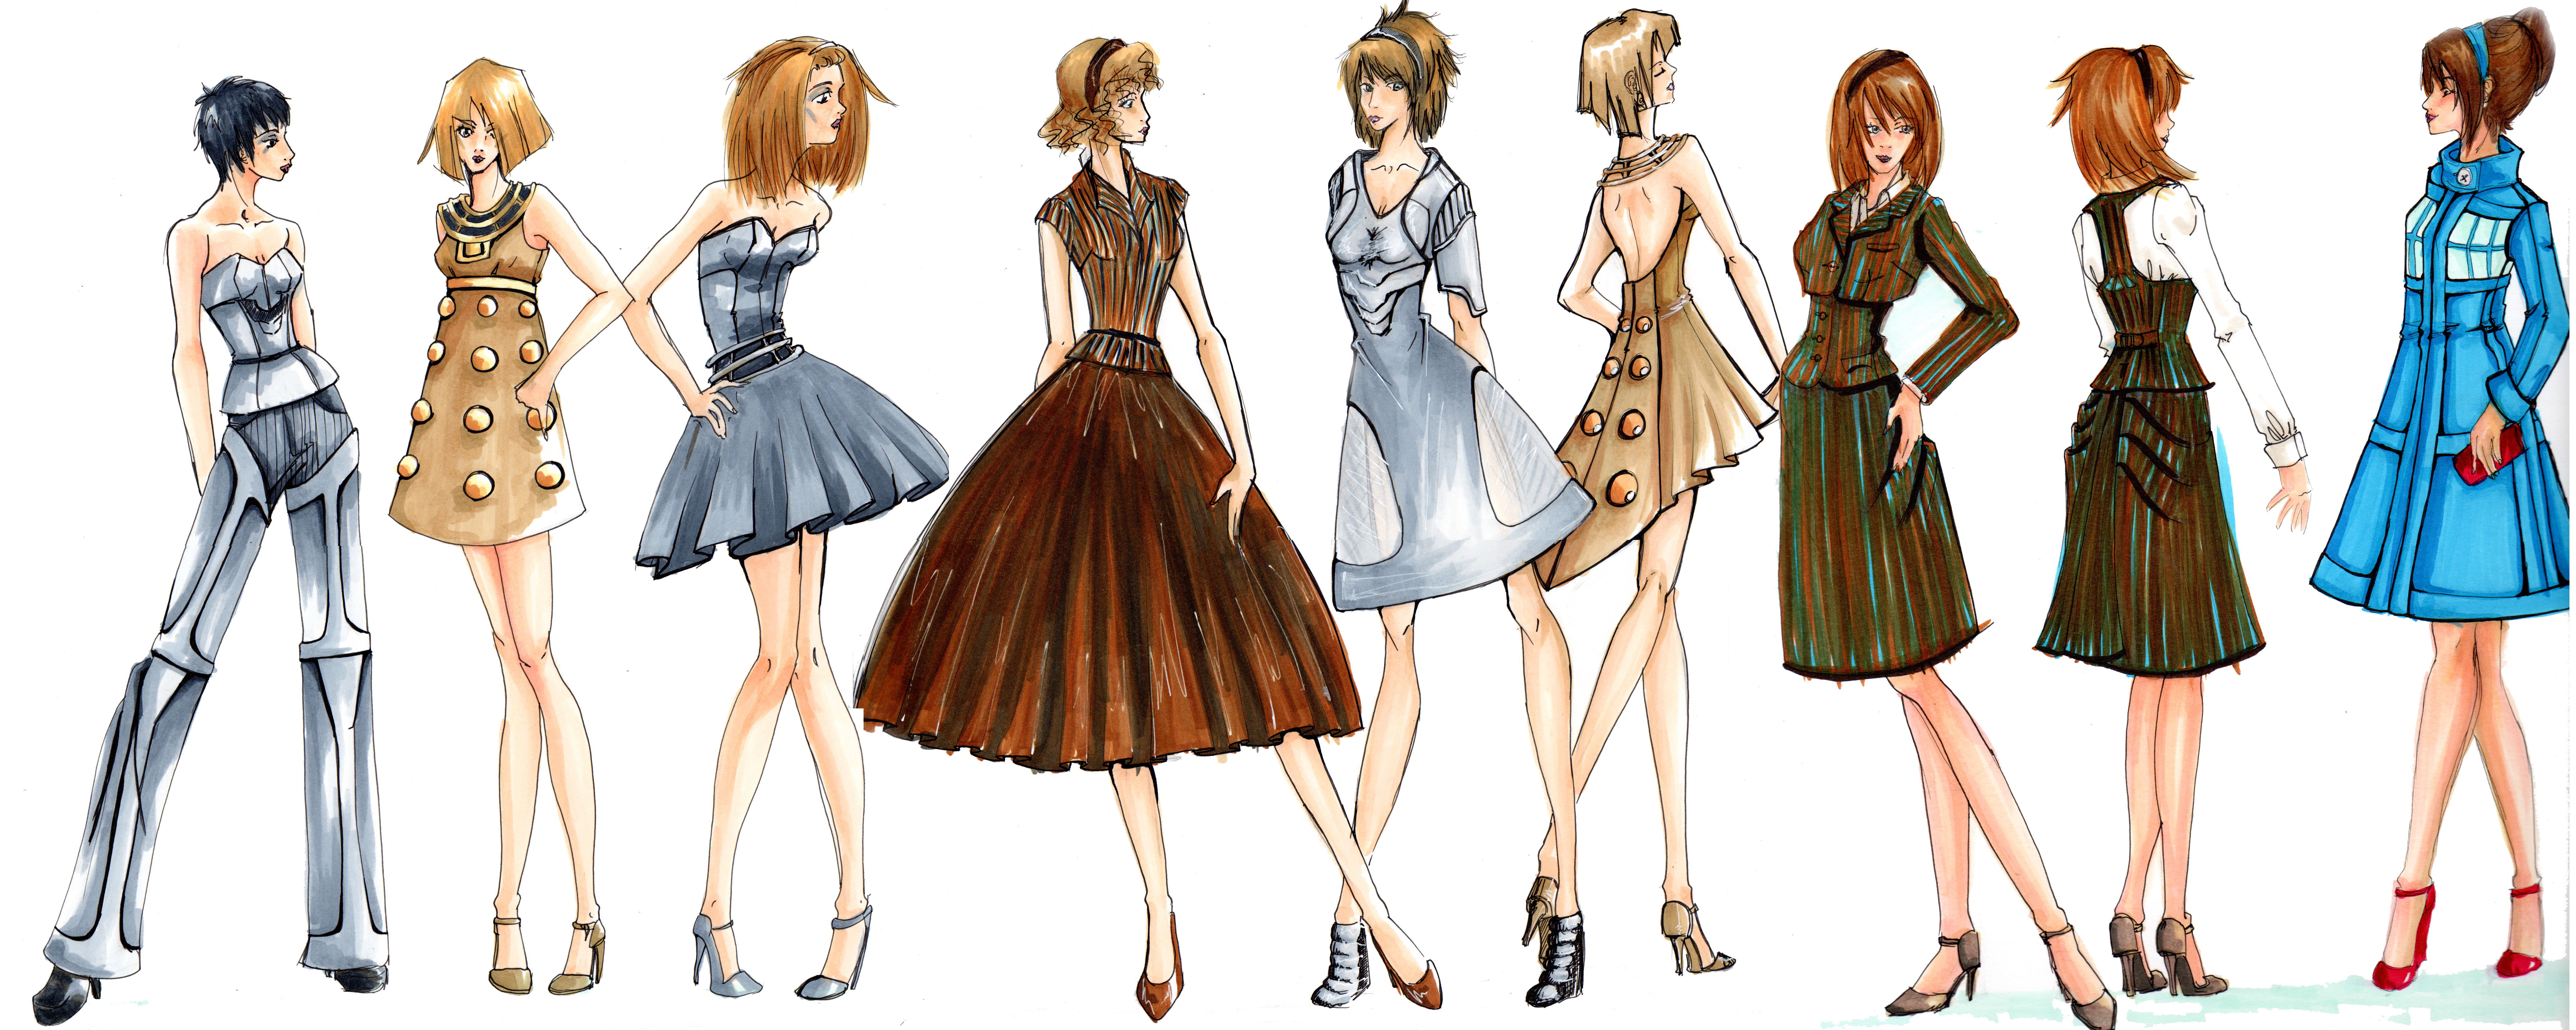 Who_fashion_collection_by_Tess_san.jpg